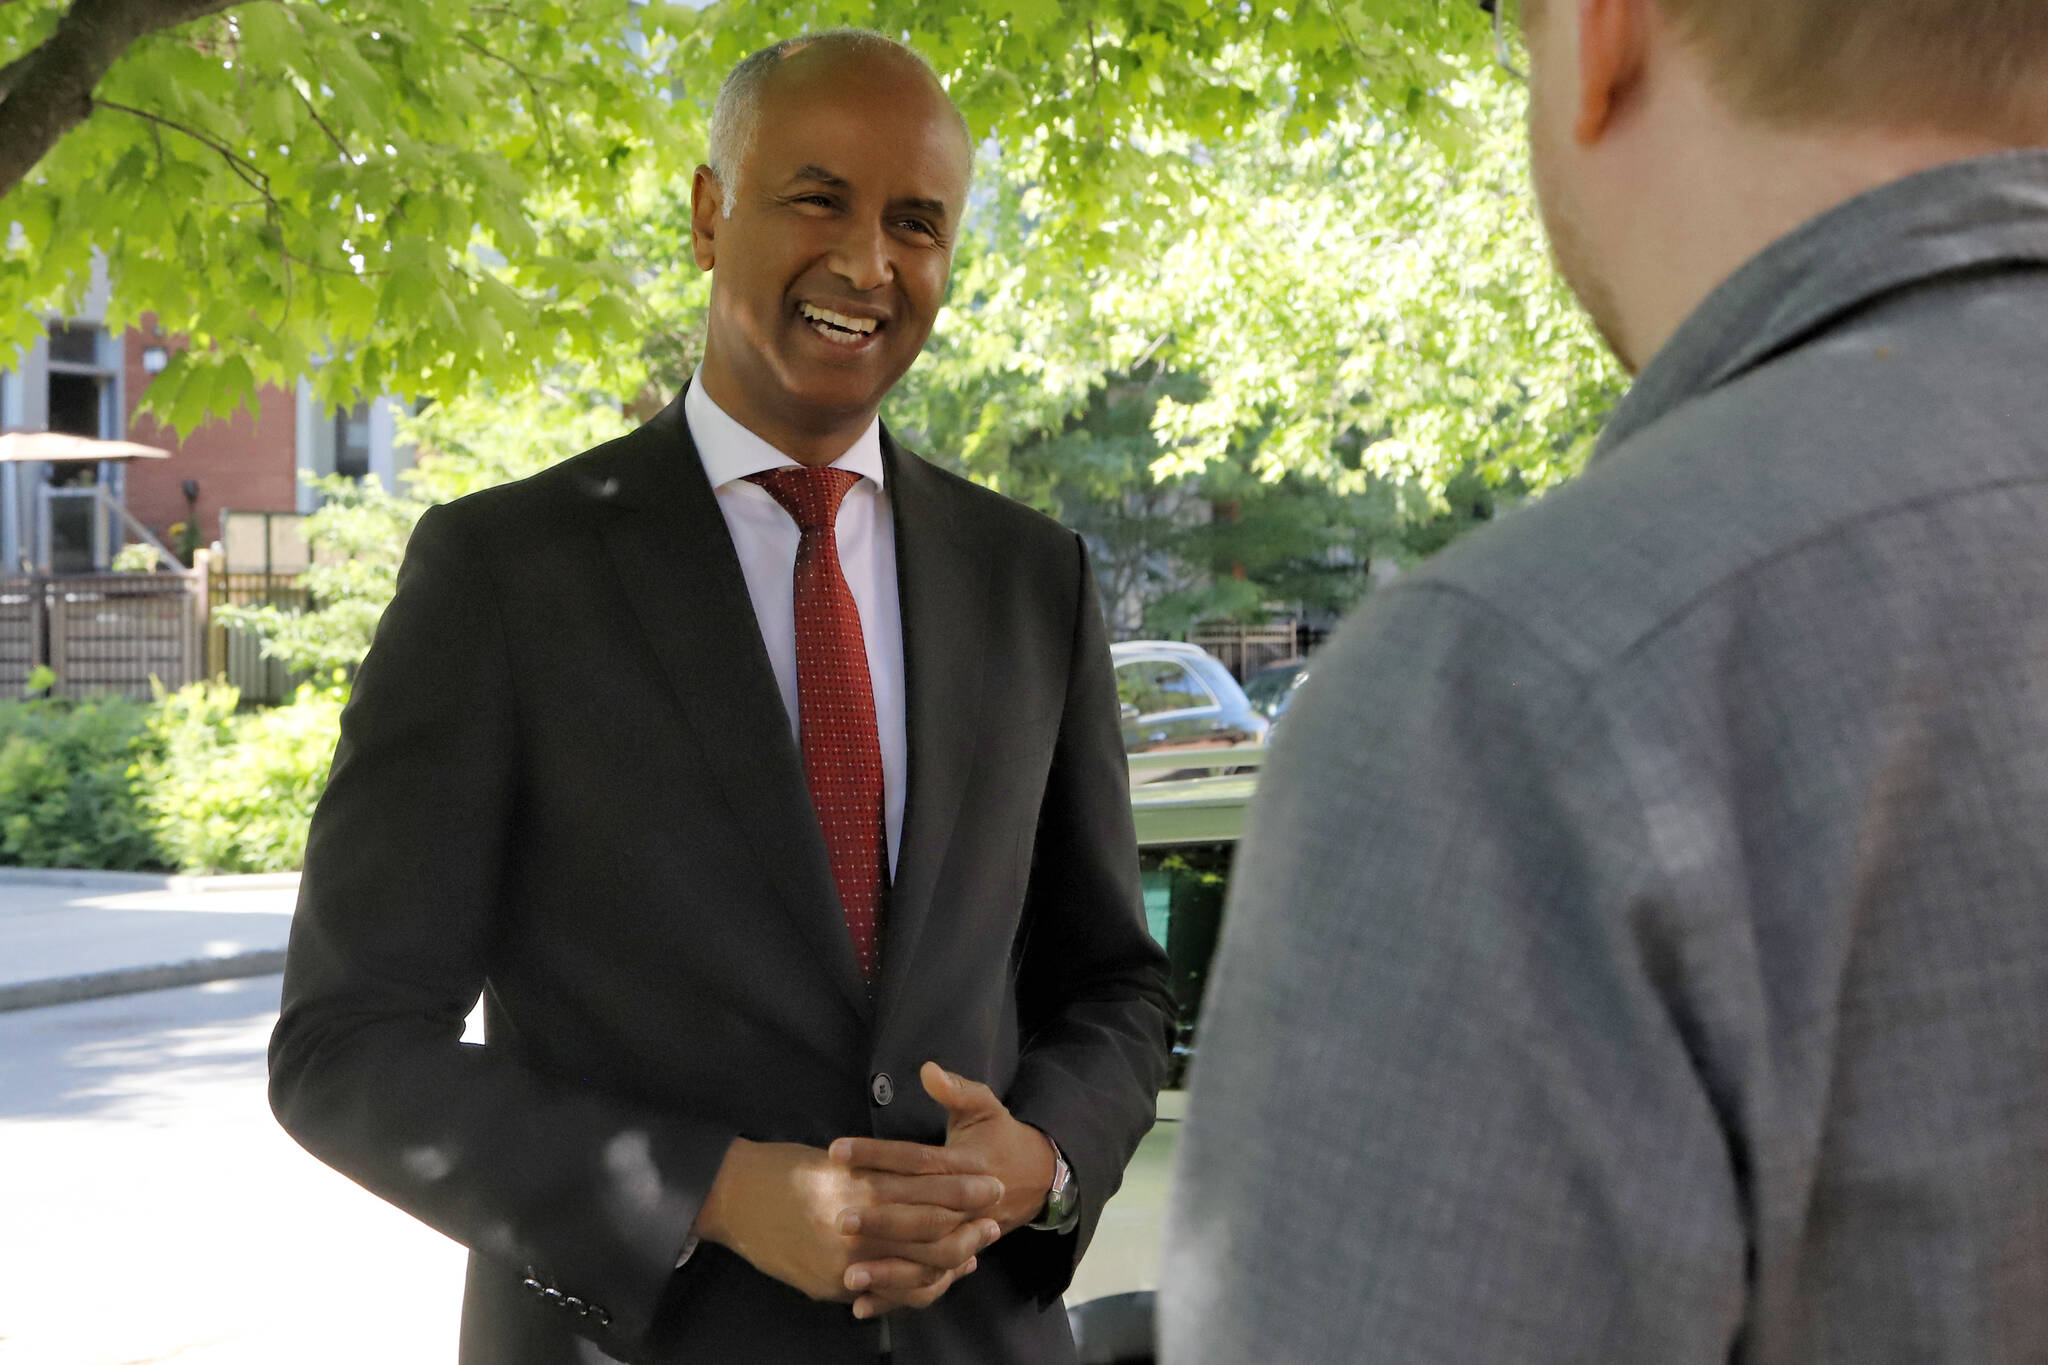 Minister of Housing and Diversity and Inclusion Ahmed Hussen speaks with a home owner after making a green housing announcement in an Ottawa neighborhood on Friday, June 17, 2022. THE CANADIAN PRESS/ Patrick Doyle